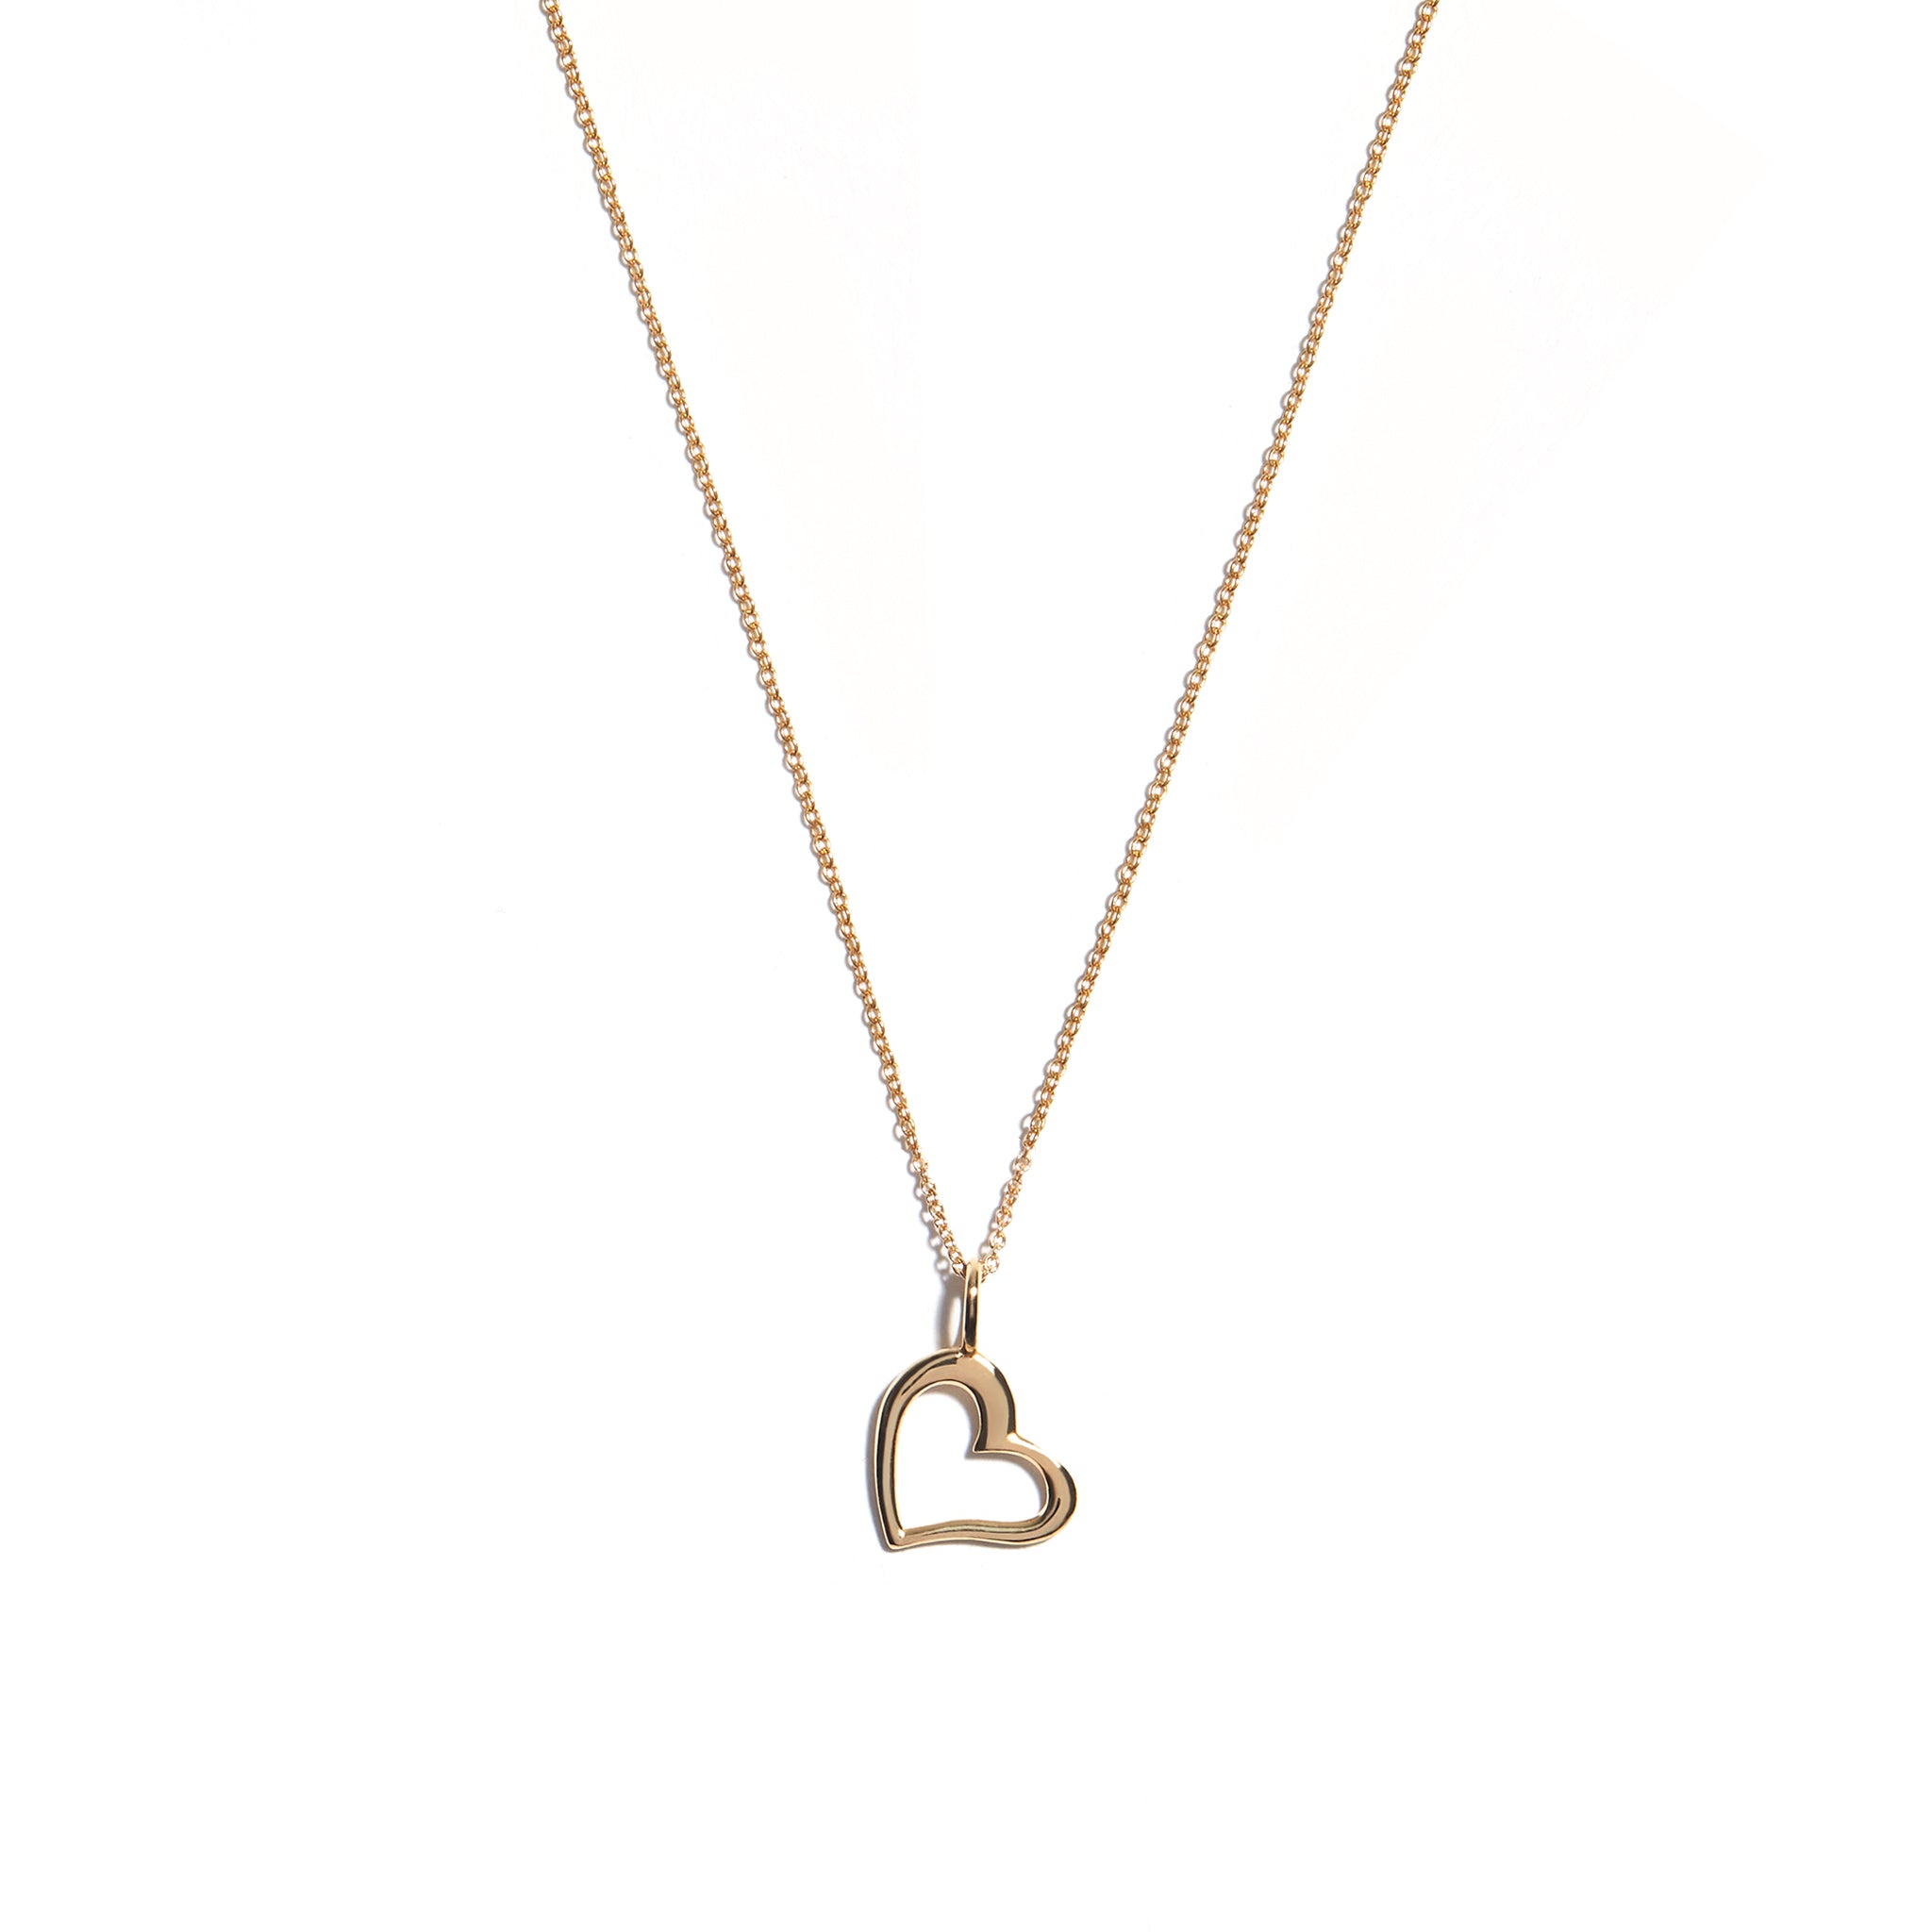 Beautiful 9 carat yellow gold Open Heart Pendant, symbolizing love and elegance, perfect for any occasion.